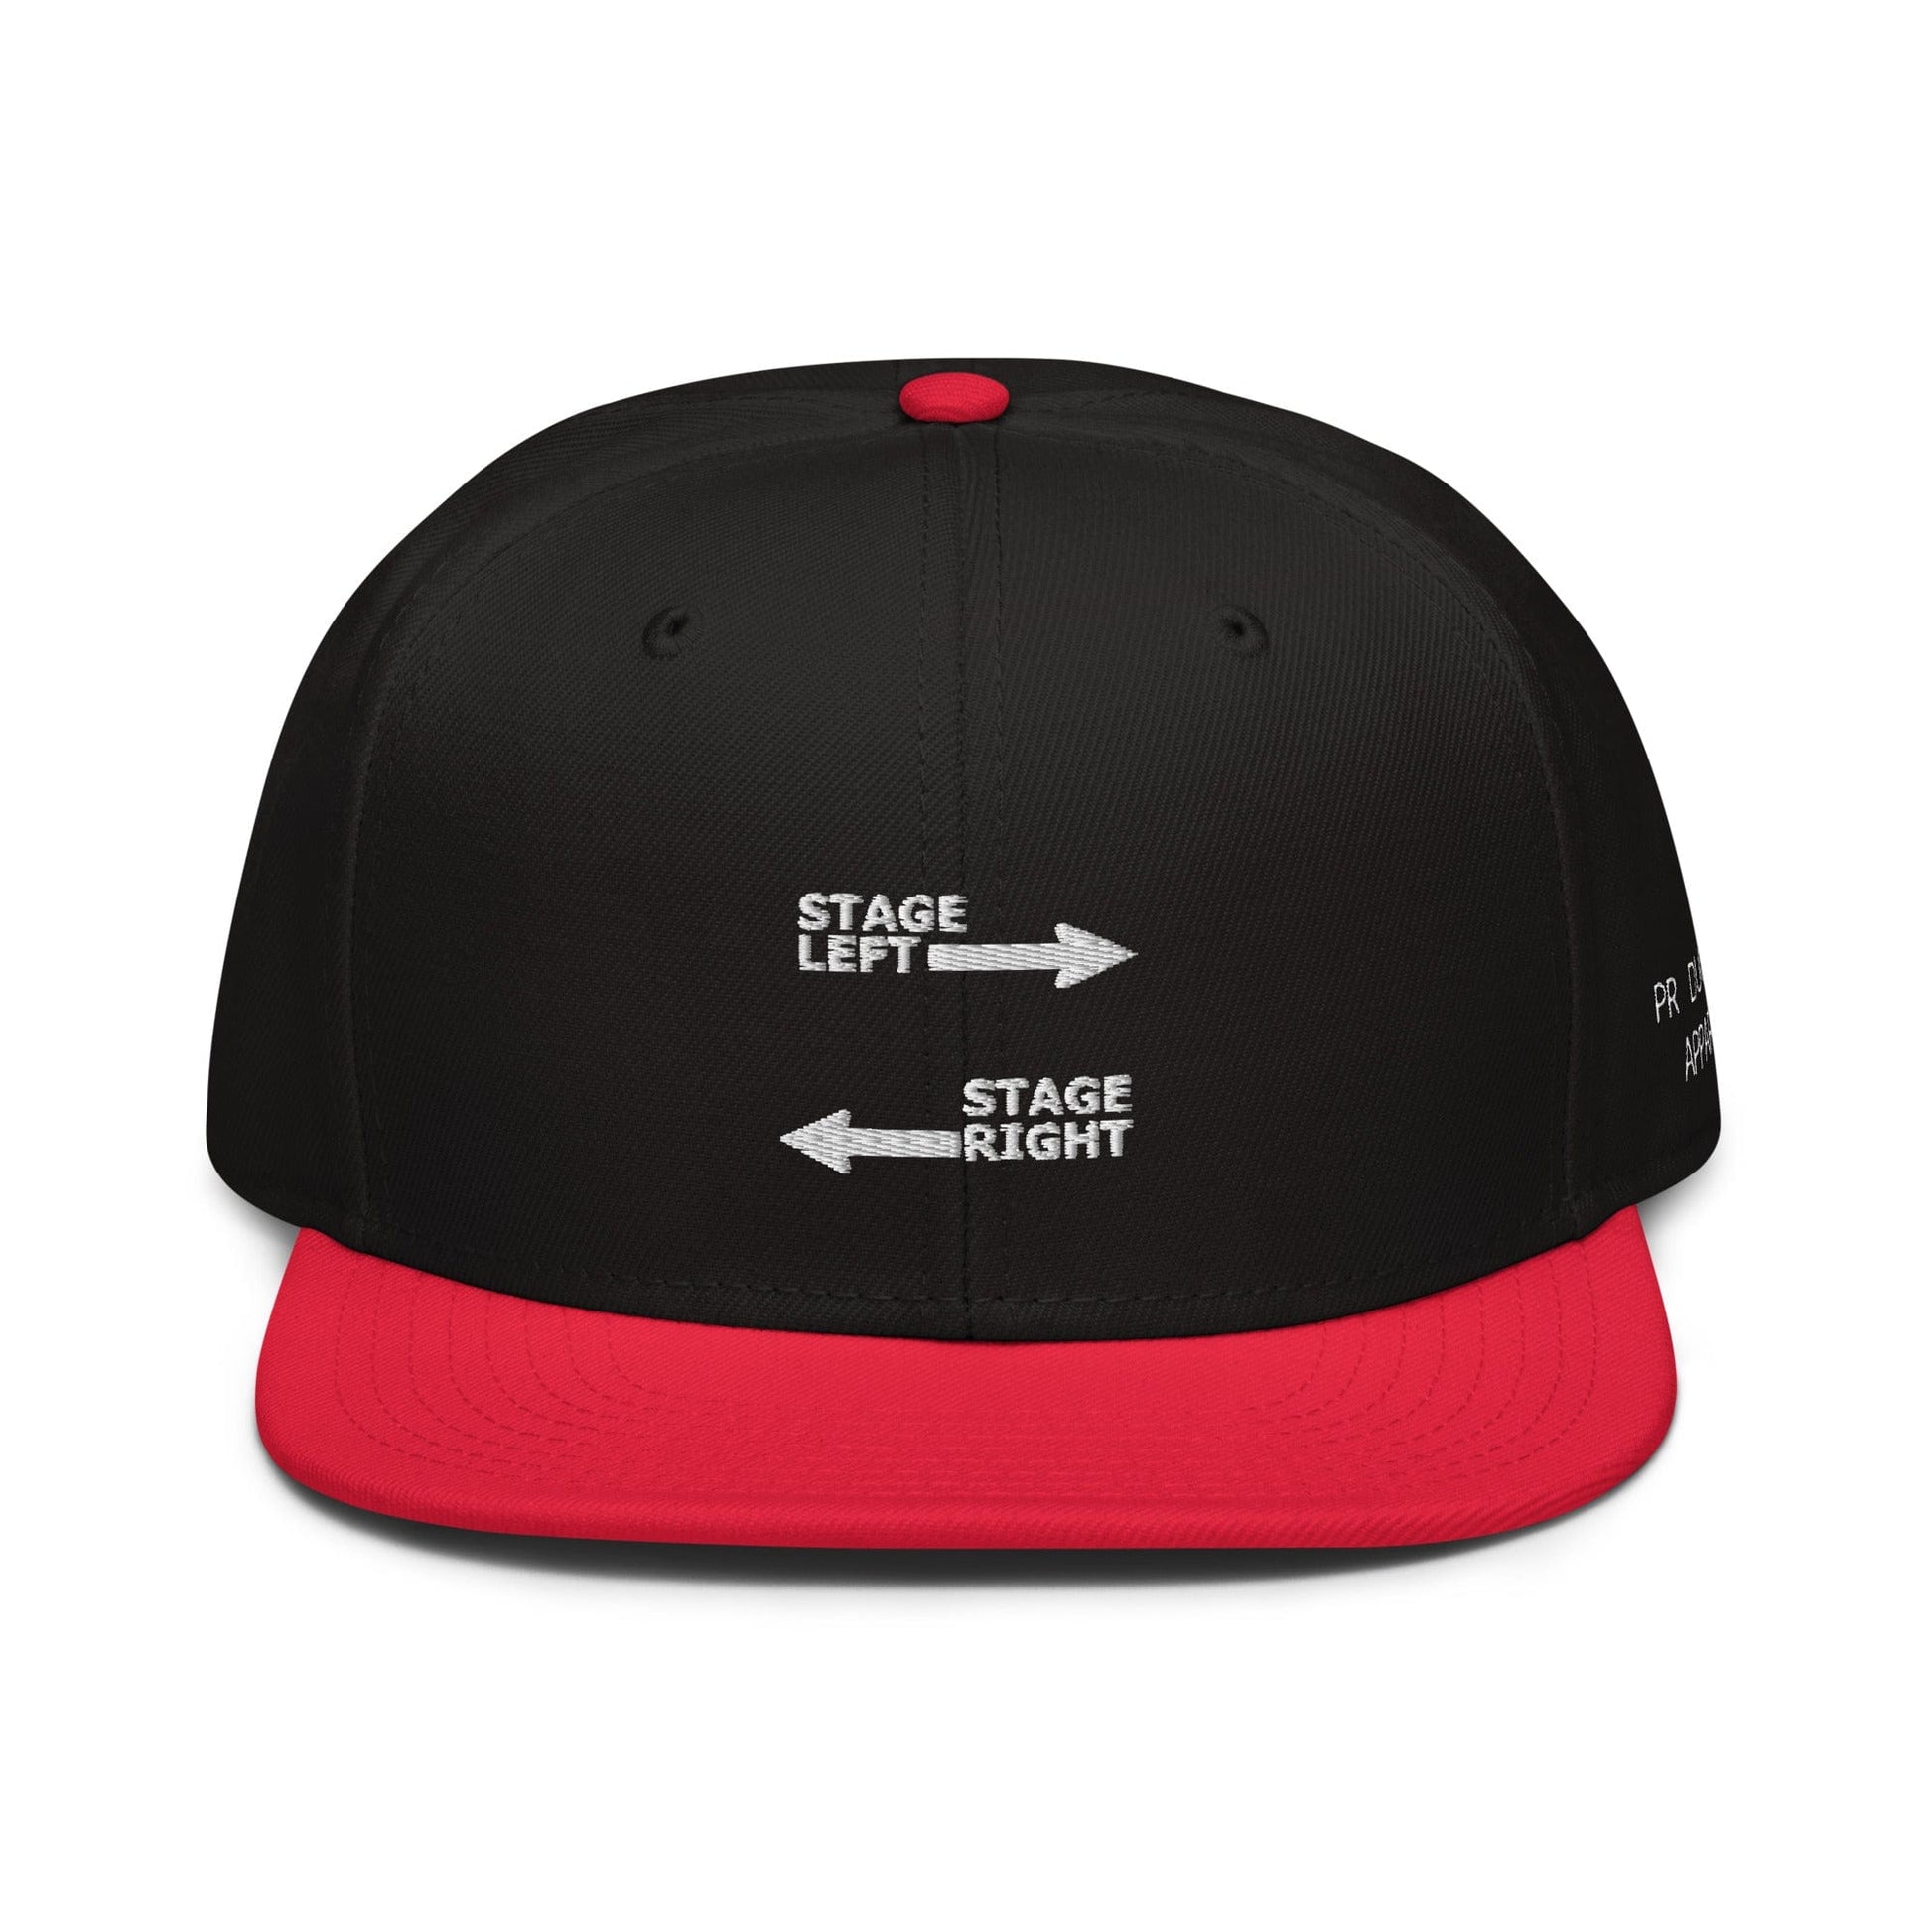 Production Apparel Stage Left - Stage Right Hat Red / Black / Black